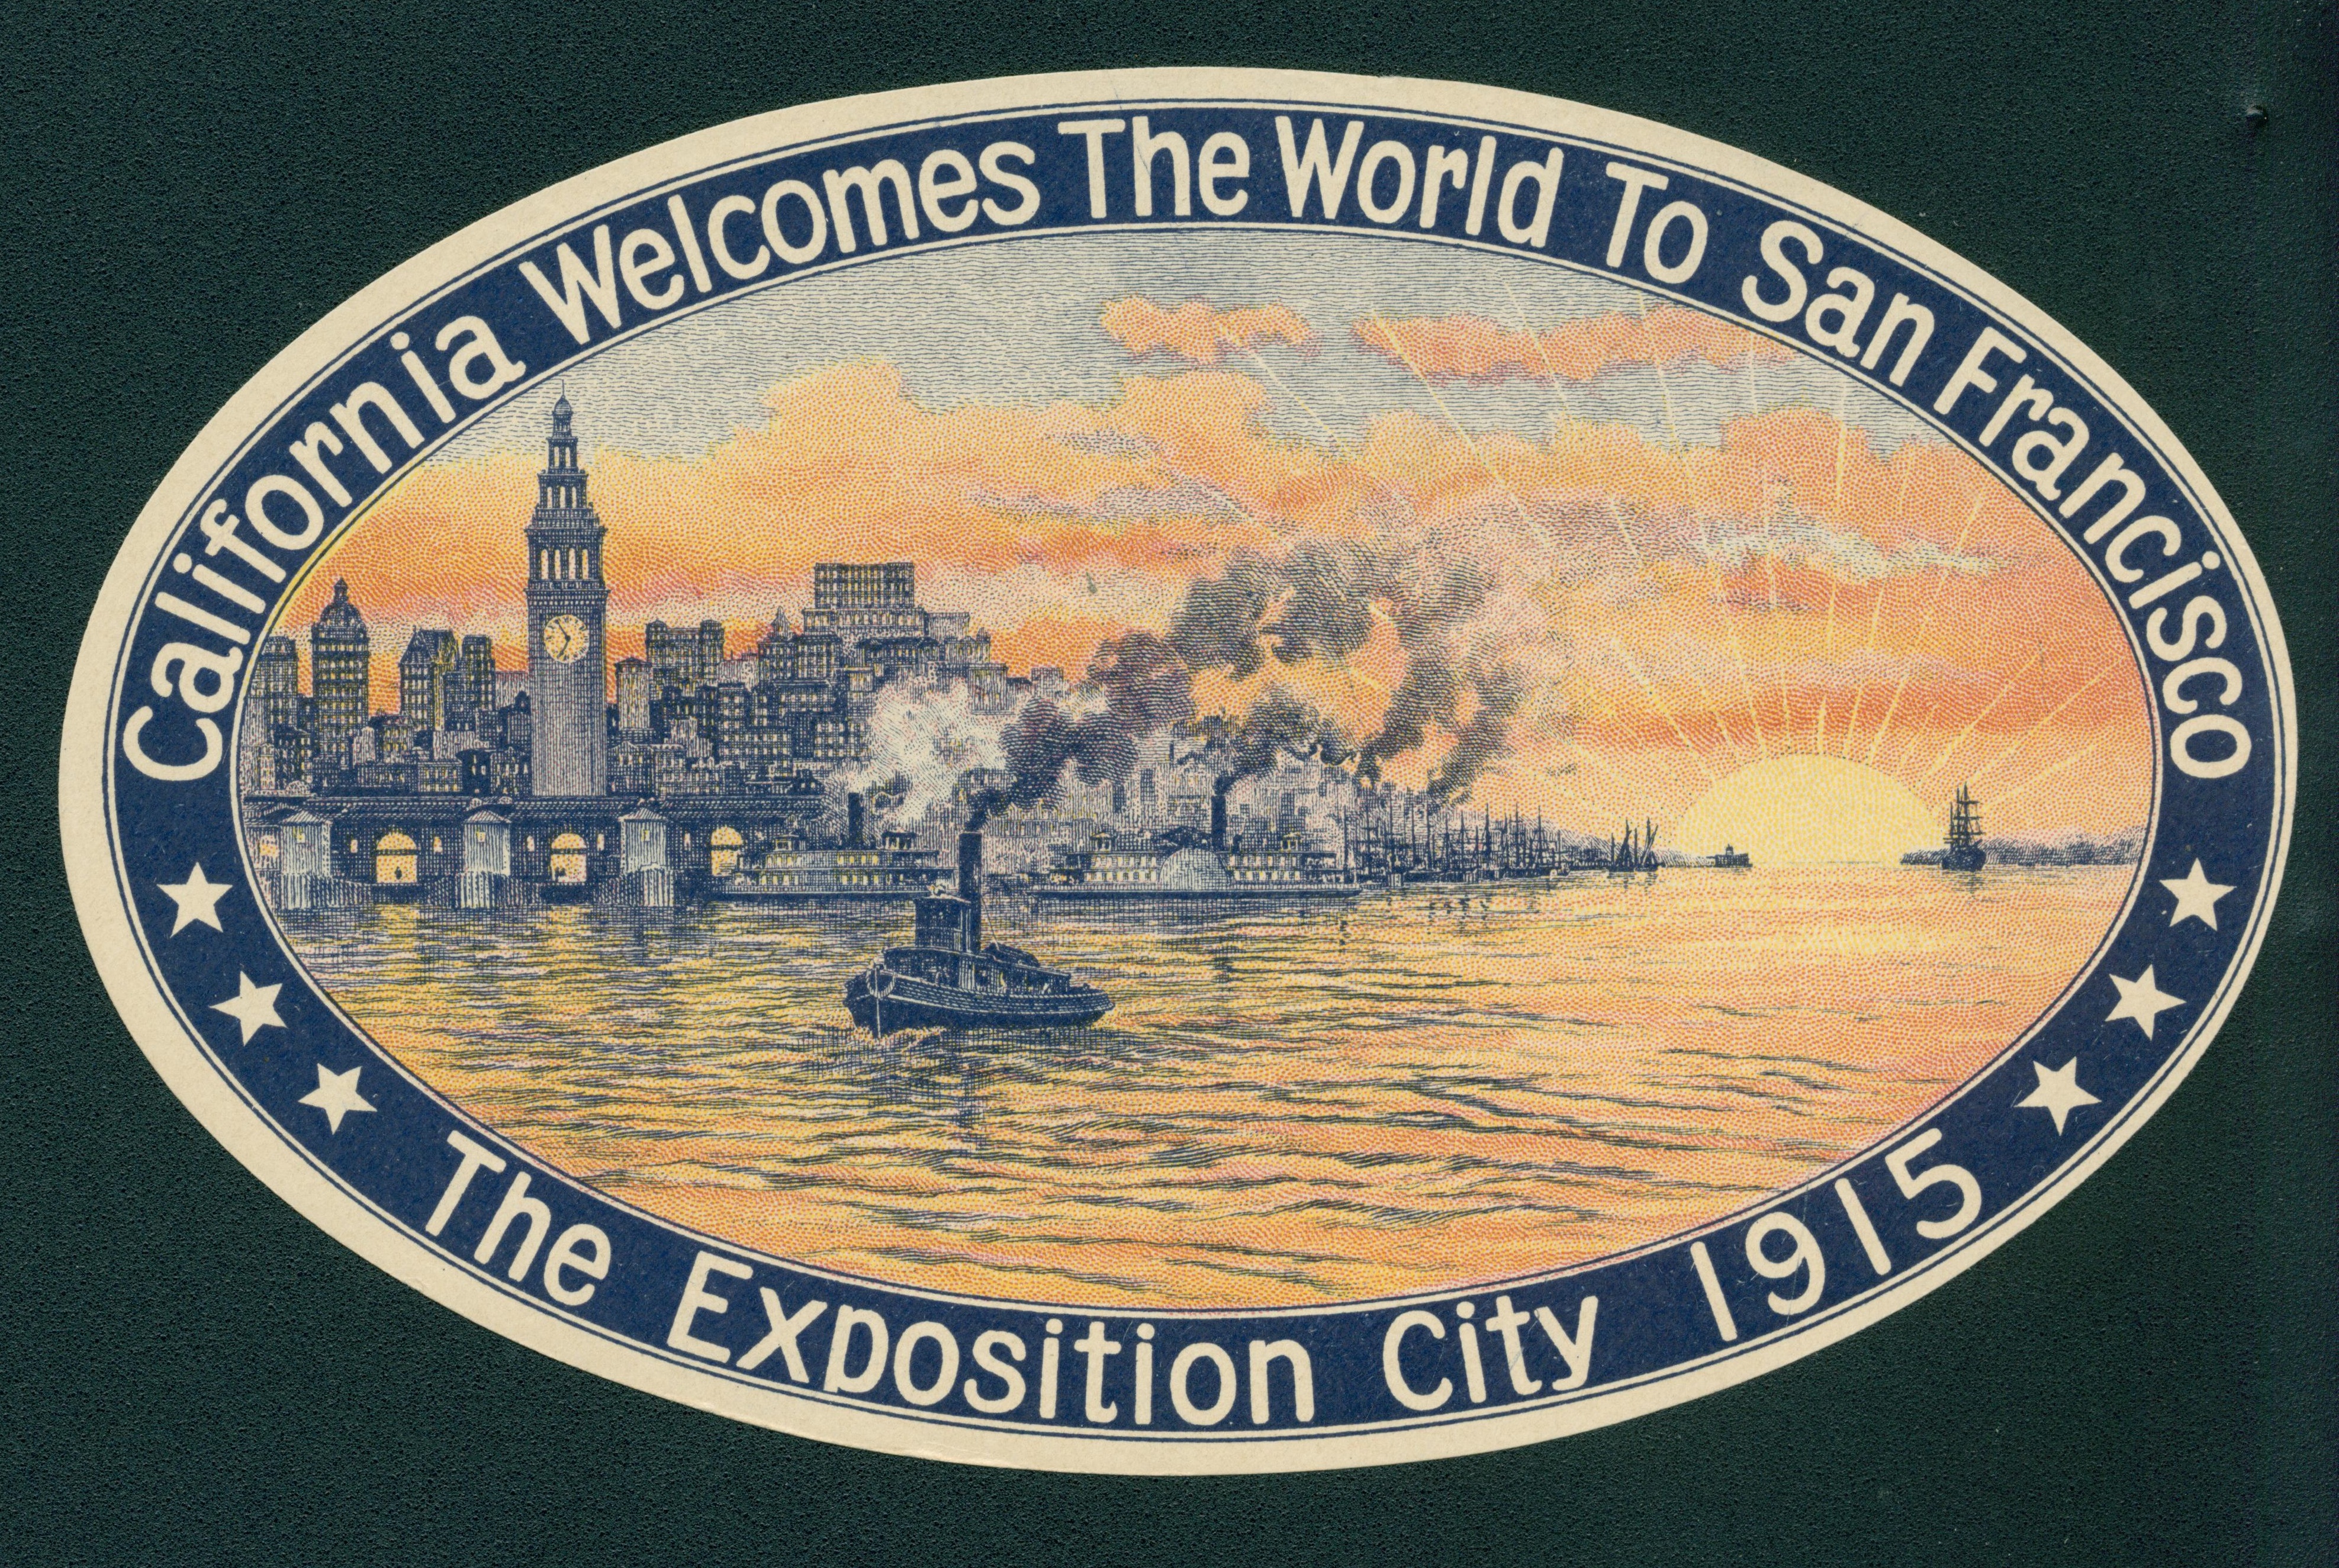 Lithograph of San Francisco from San Francisco Bay with golden sun setting at the entrance.